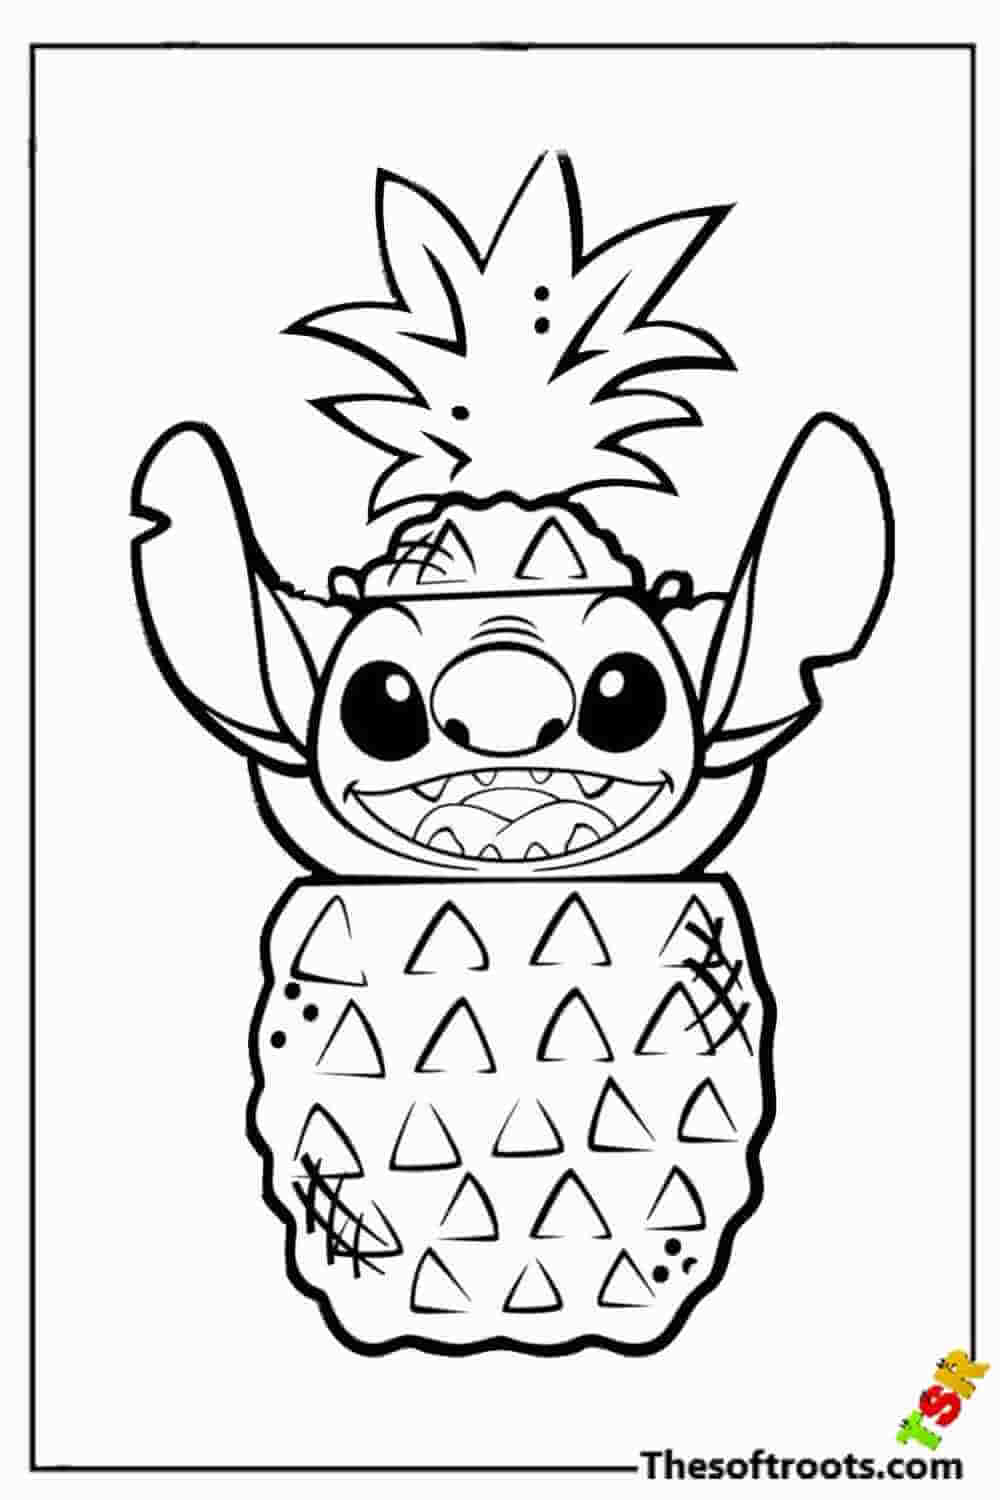 Hawaiian Stitch coloring pages